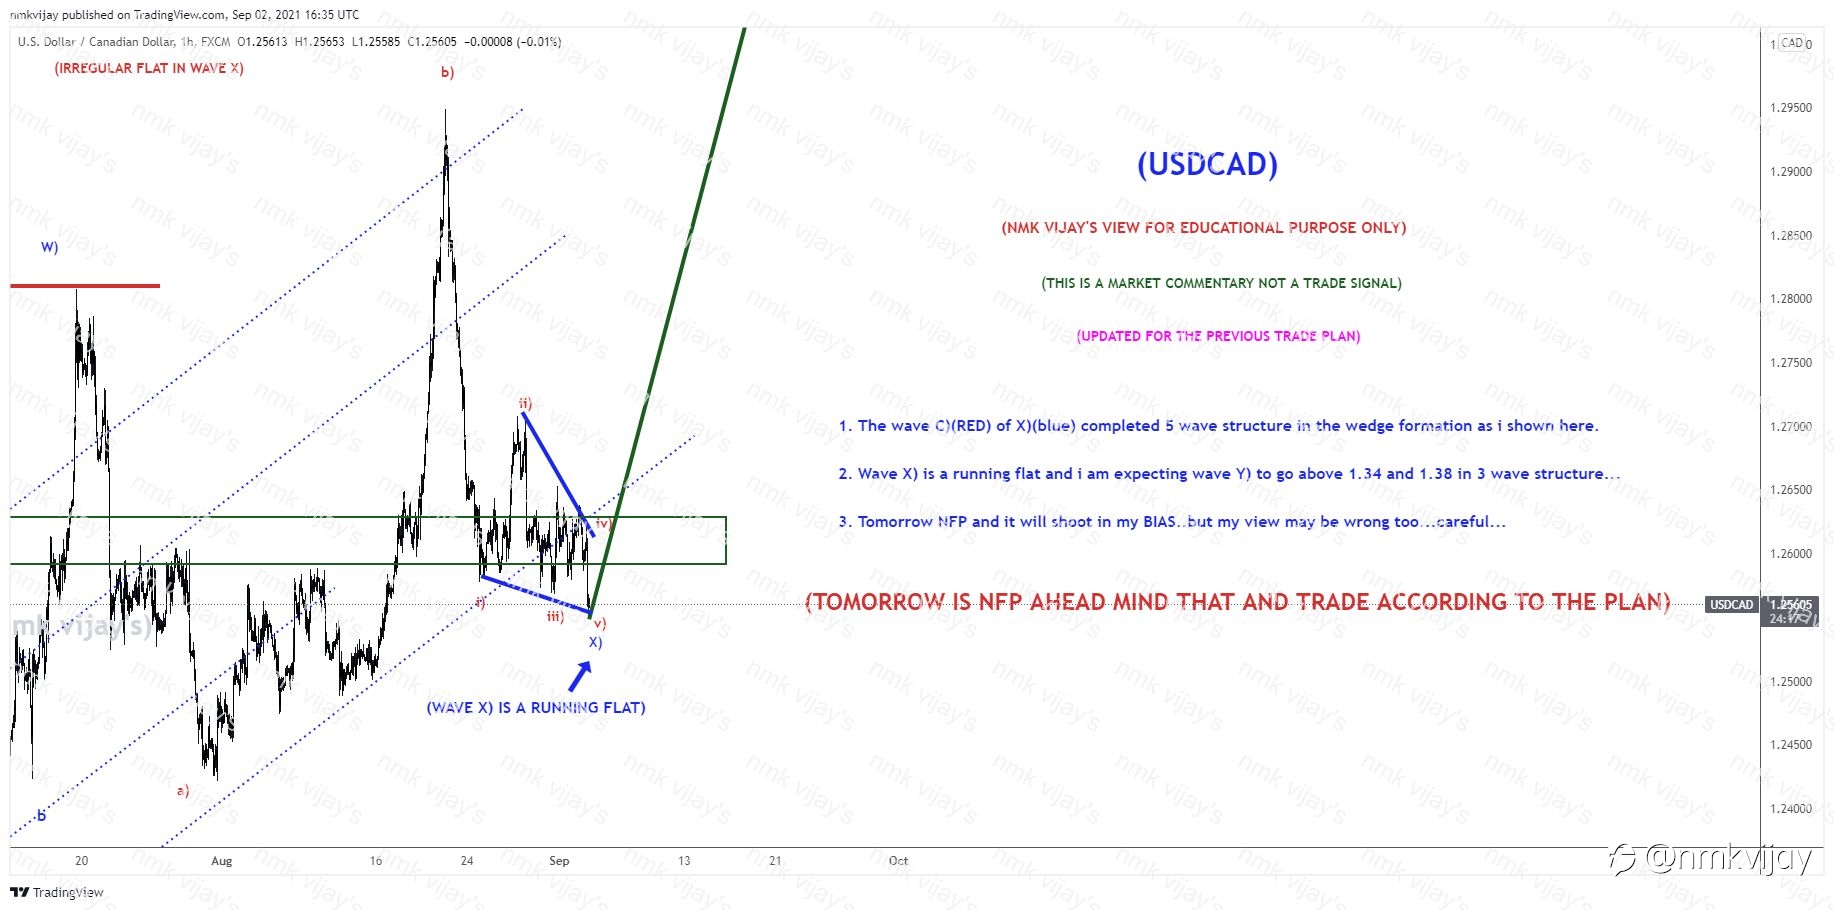 USDCAD-C) of X) in wedge formation to complete as a running flat